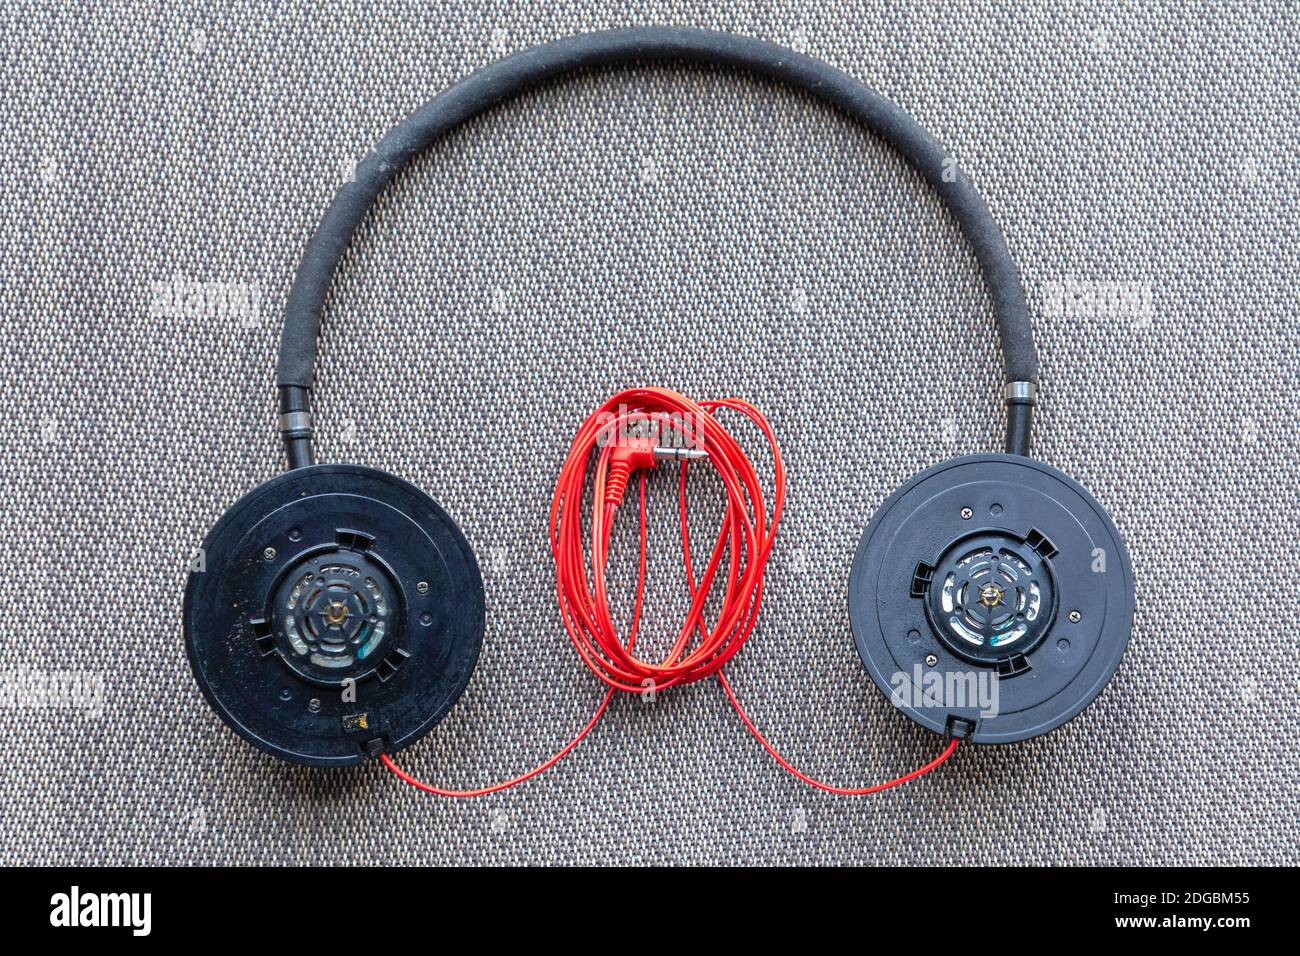 Old Used Headphones Without Earpieces Cushion Protection Stock Photo